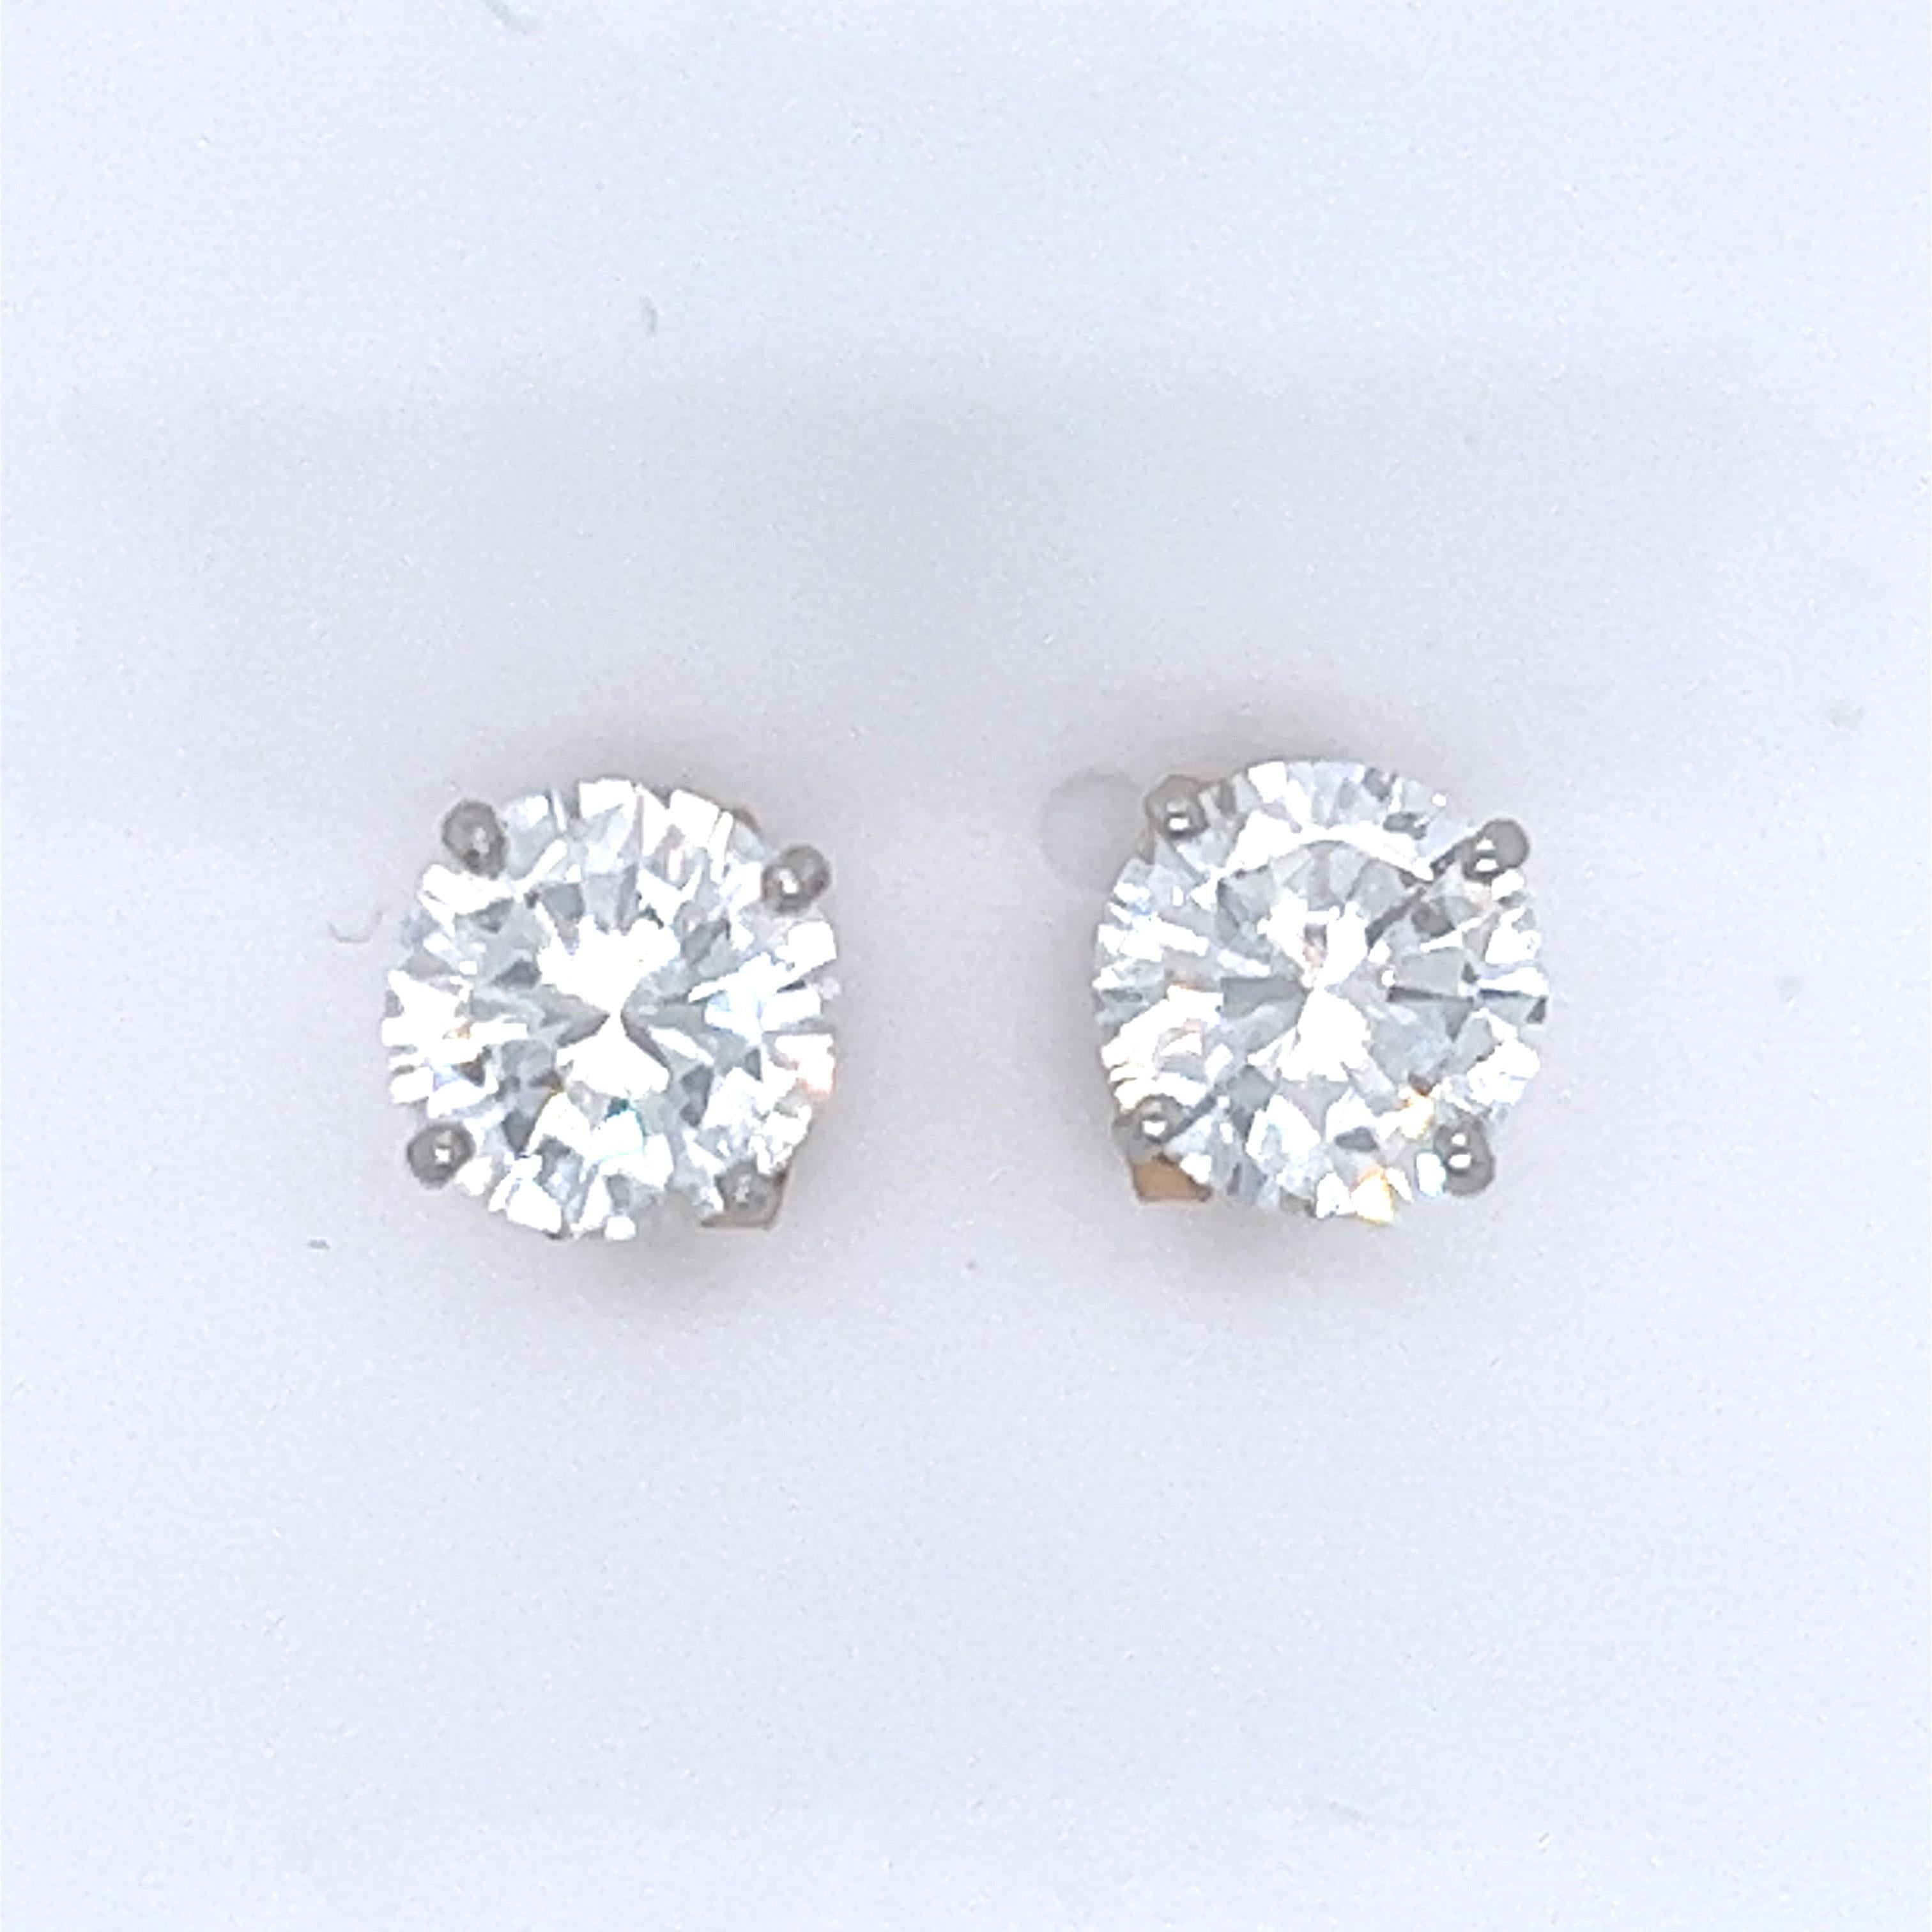 Luminary Fine Jewellery are pleased to offer this stunning pair of Diamond studs, it's very rare to find such beautiful quality Diamonds in this size, and at this price.

Set in 18ct White gold with Yellow gold Butterfly backs.

Each Diamond